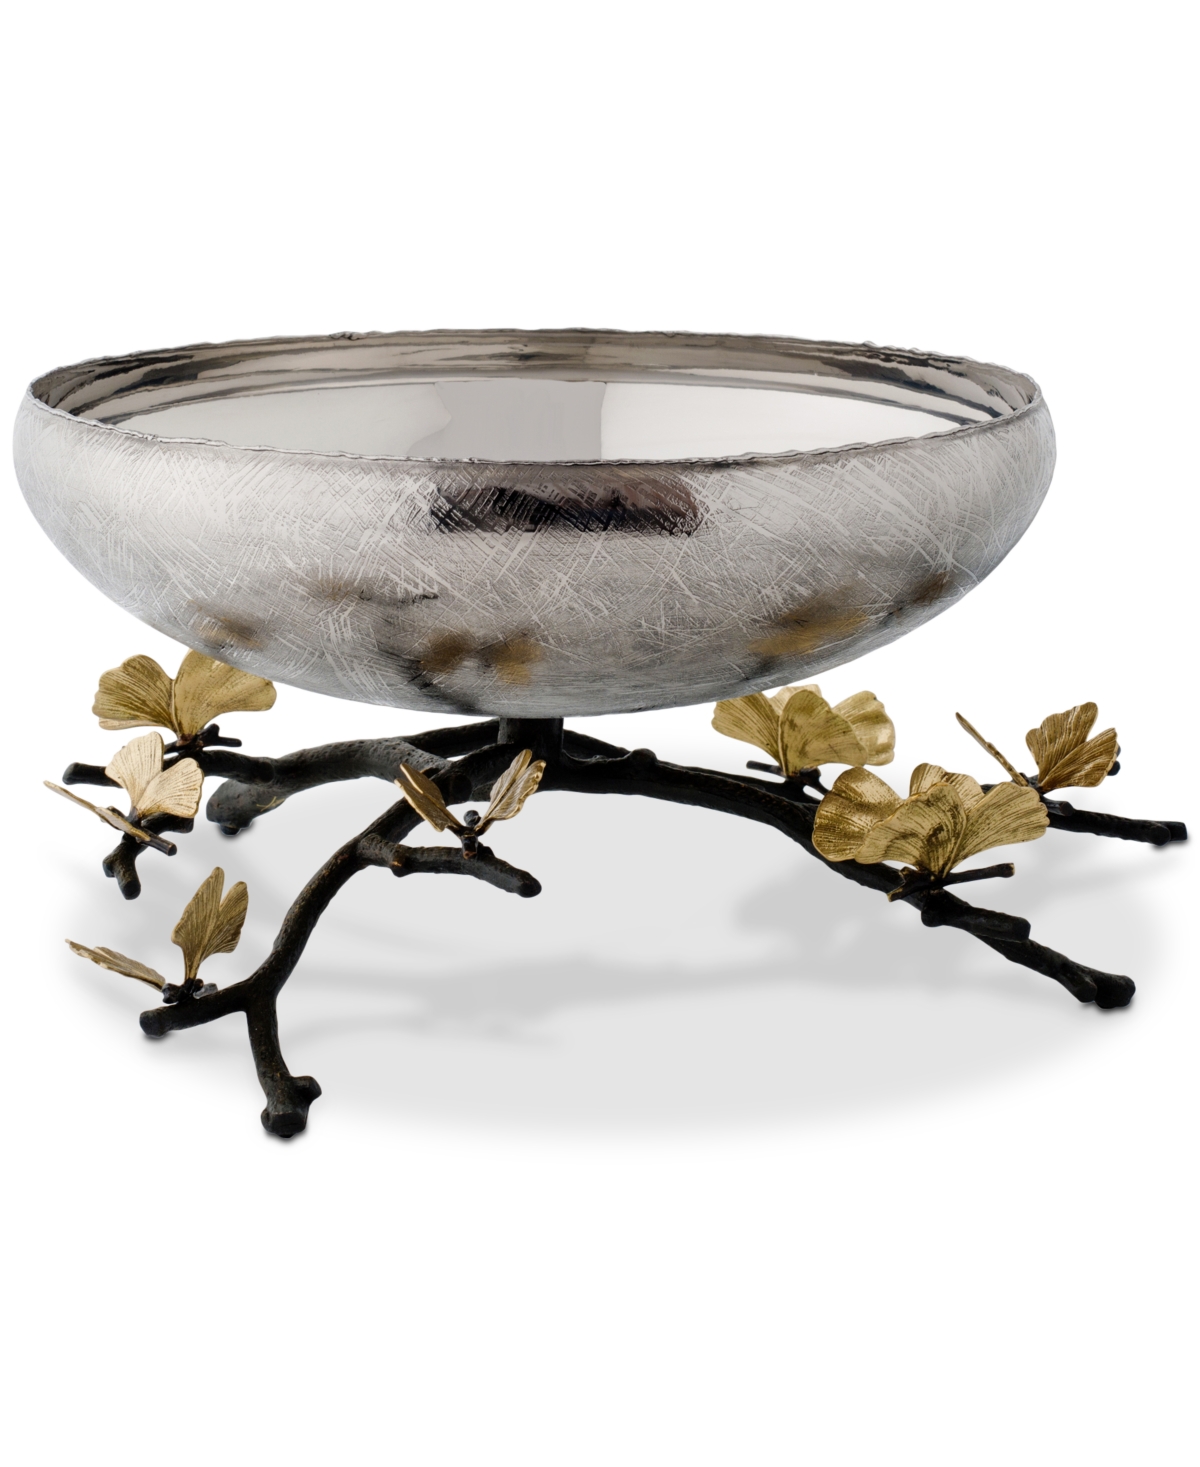 Butterfly Ginkgo Medium Footed Centerpiece Bowl - Silver